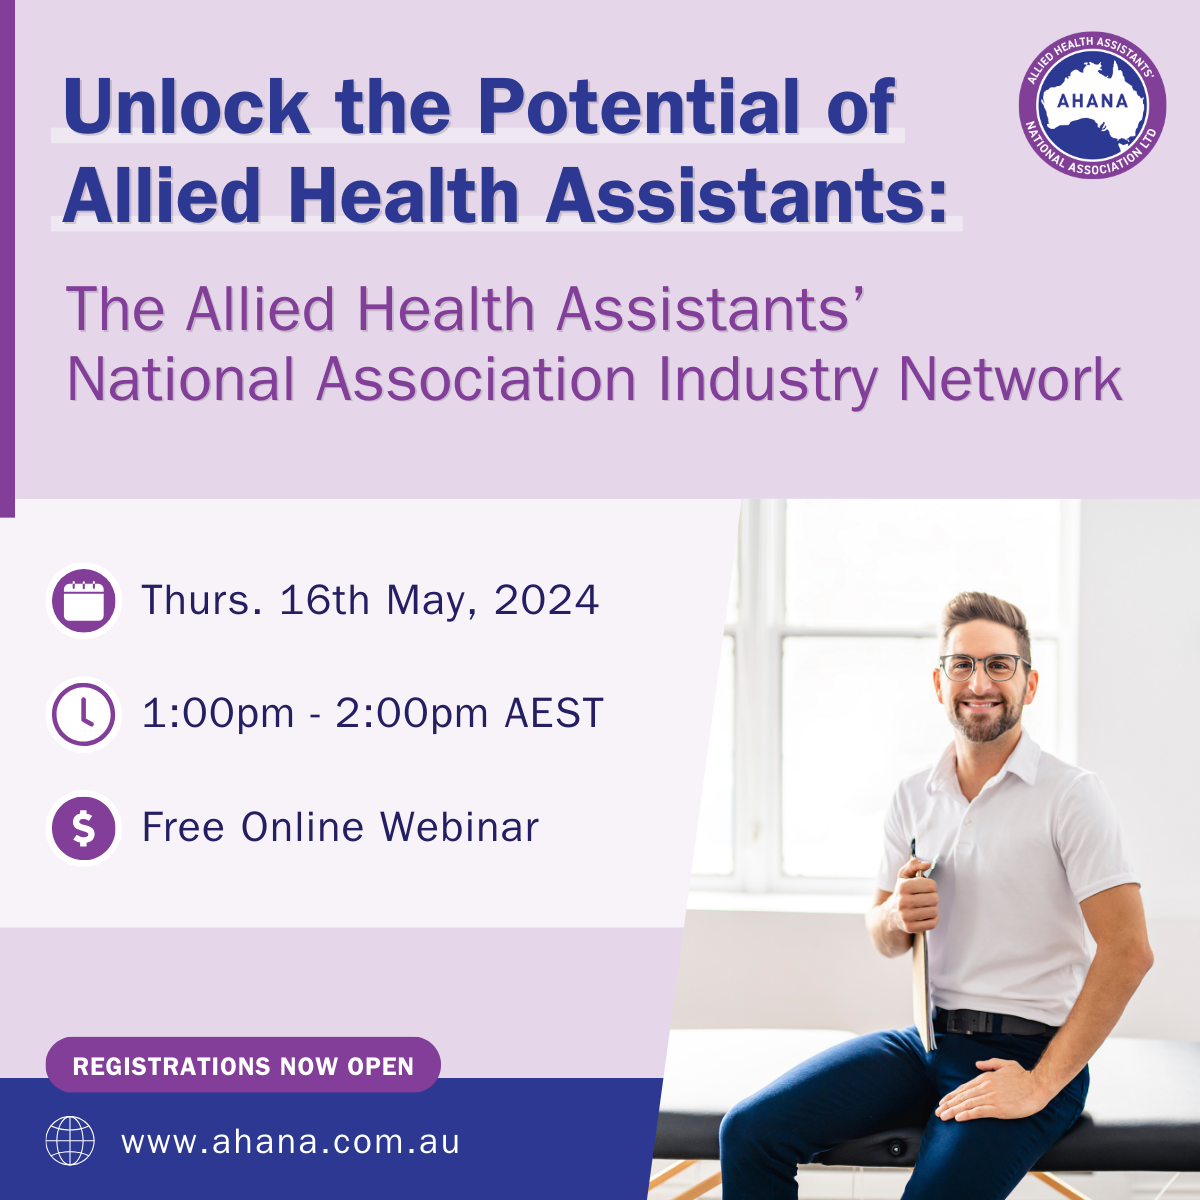 Unlock the Potential of Allied Health Assistants - the Allied Health Assistants’ National Association Industry Network